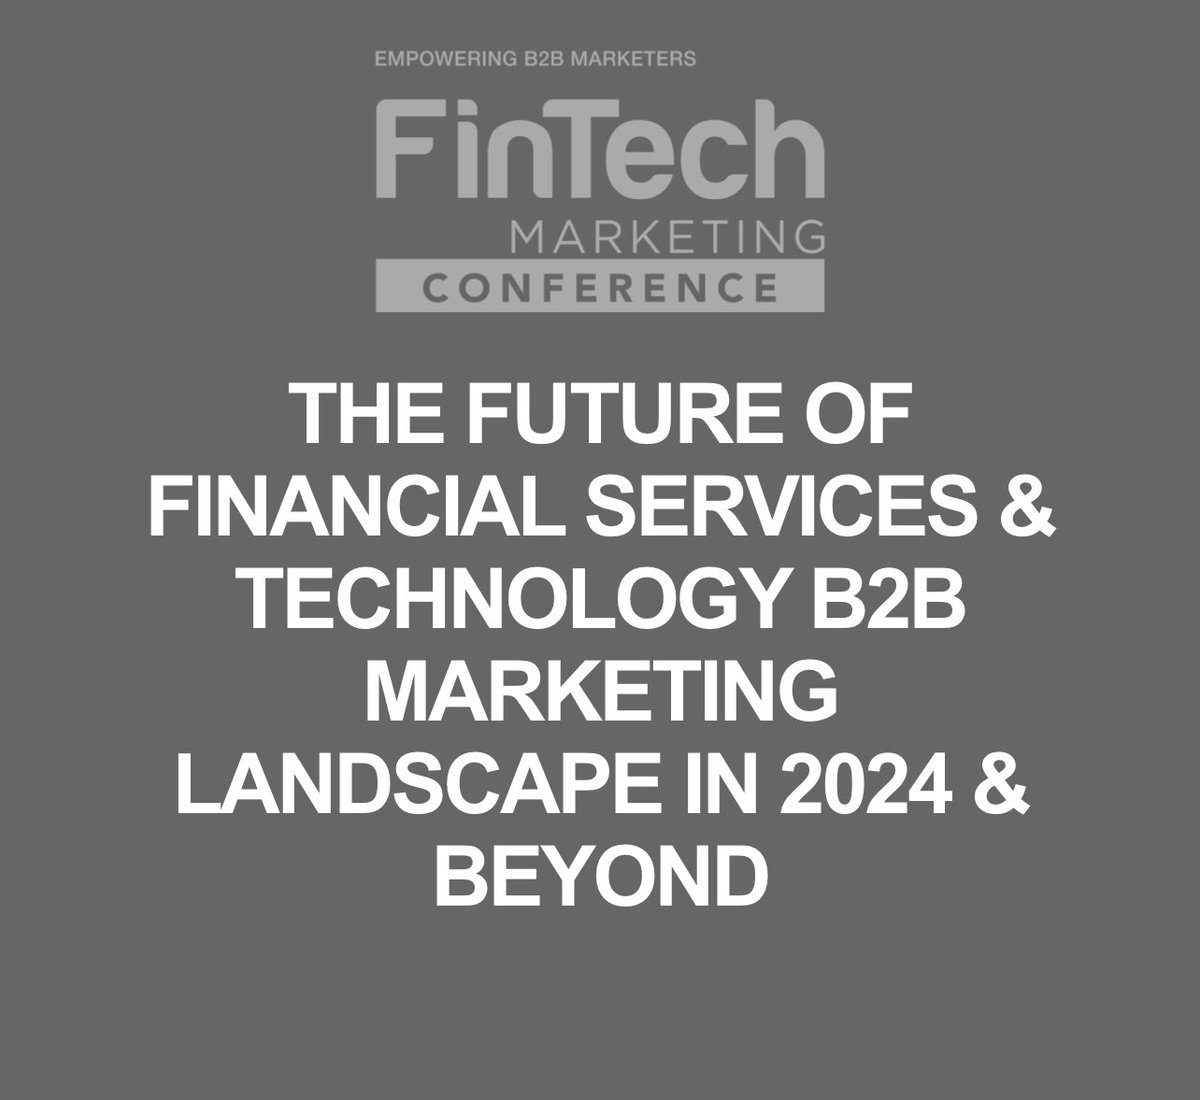 Looking forward to the Fintech B2B Marketing Community Conference in London tomorrow and connecting with my fellow industry peers and experts from #FinTech and #B2BMarketing 

bit.ly/414D32Z

#fintechb2bmarketing  #technologymarketing #finservices #techmarketing